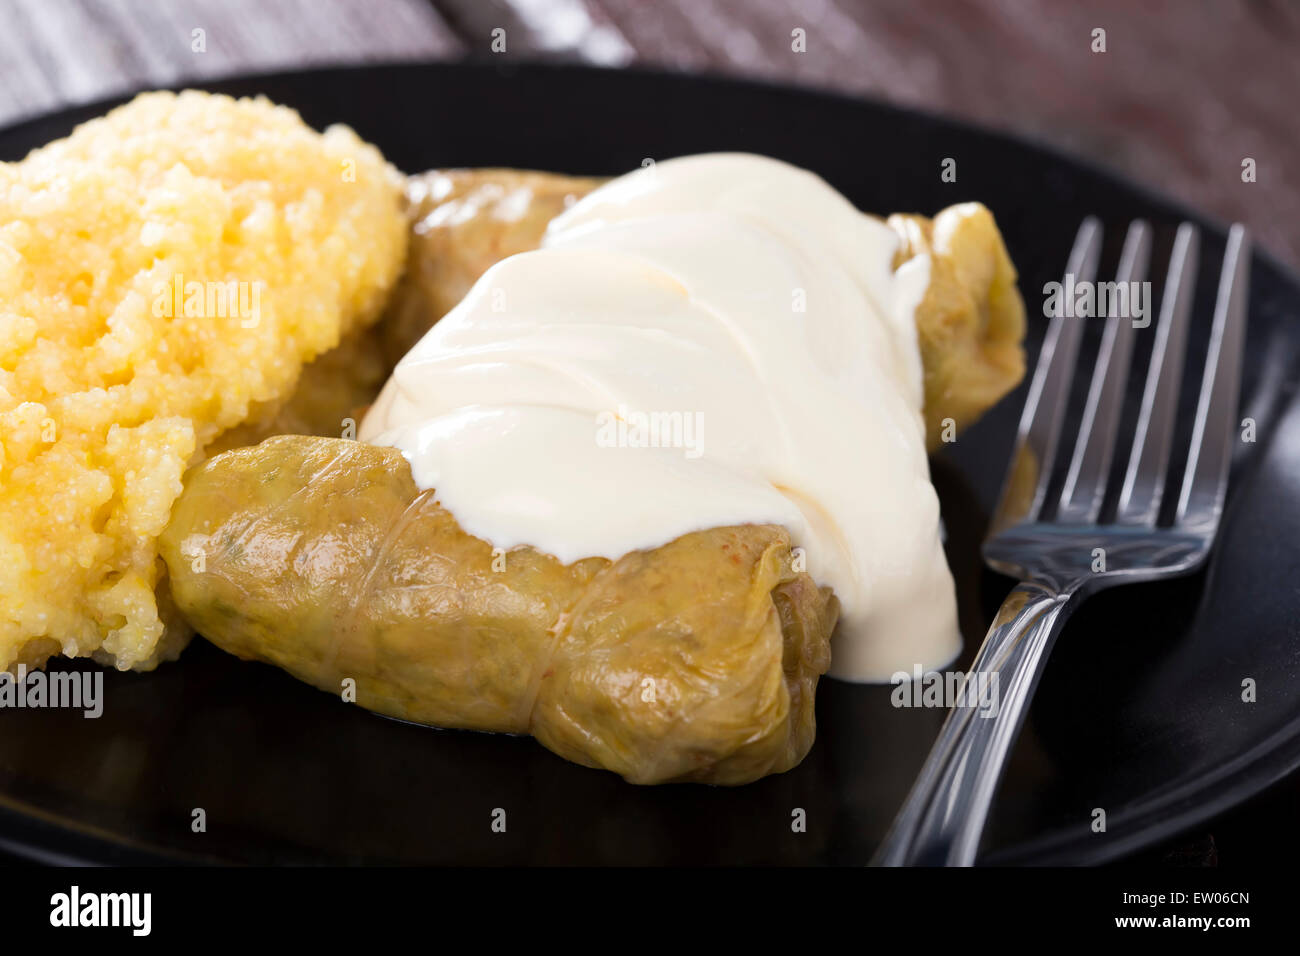 Cabbage rolls filled with minced meat and rice on plate with polenta, over wooden table Stock Photo